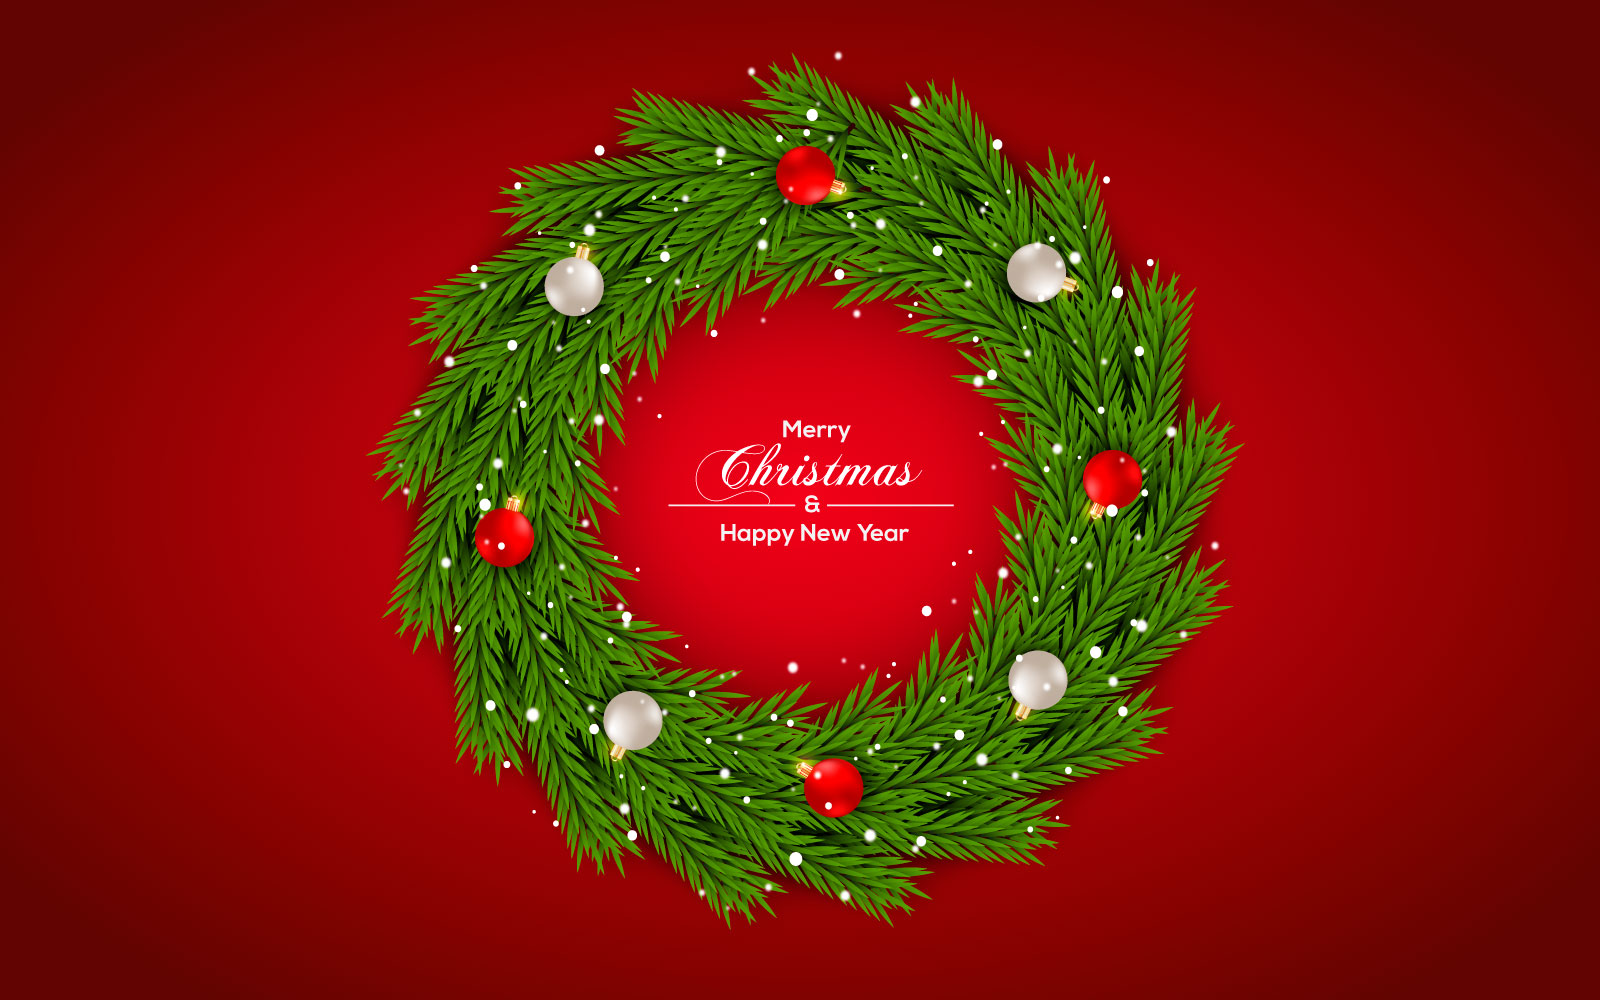 Christmas wreath vector concept design. merry christmas text in grass wreath element with balls